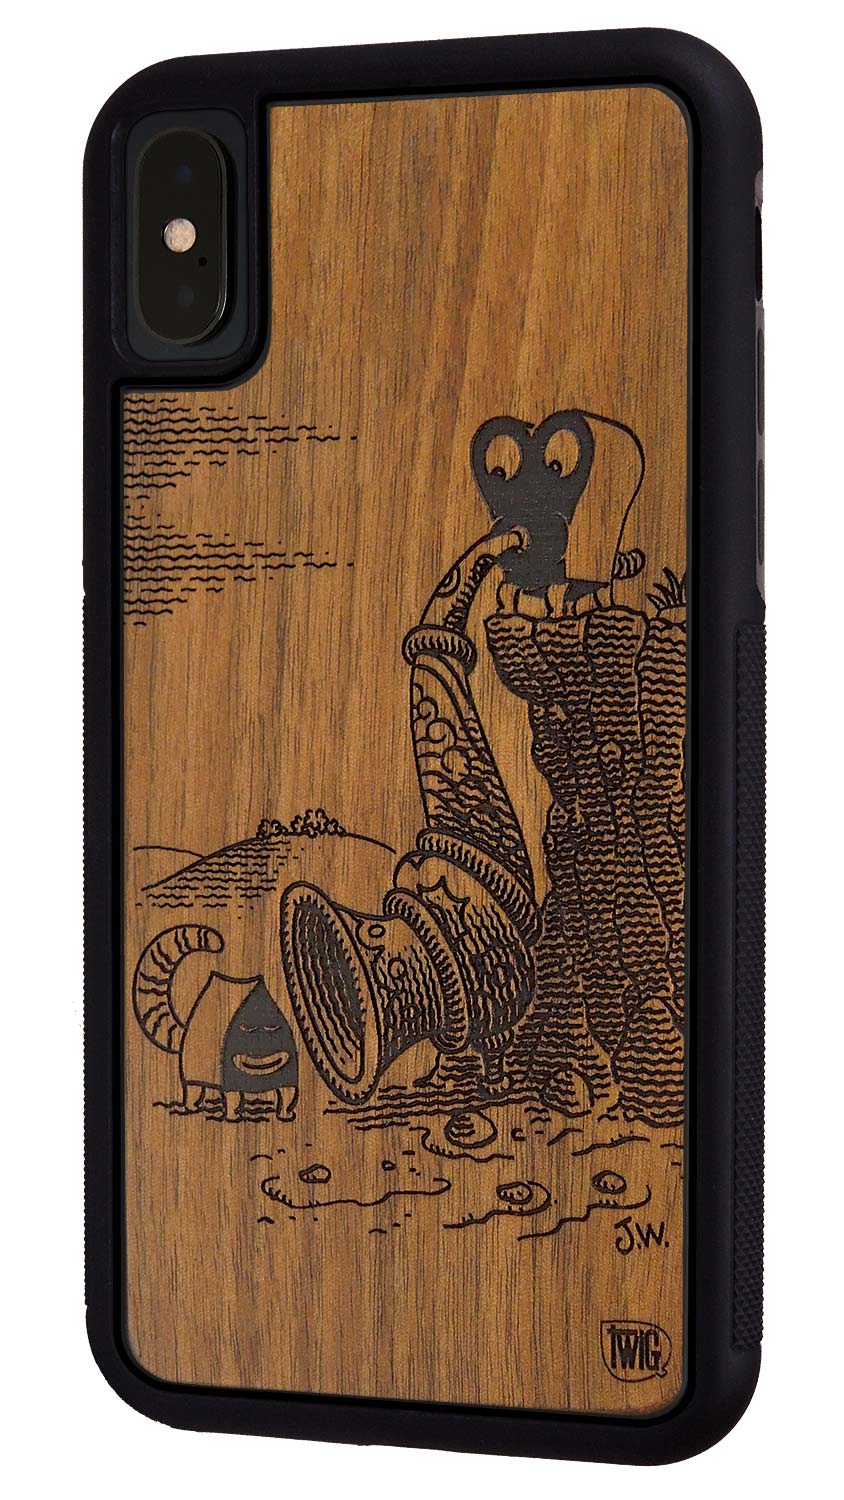 I Will Destroy You - Walnut iPhone Case, iPhone Case - Twig Case Co.